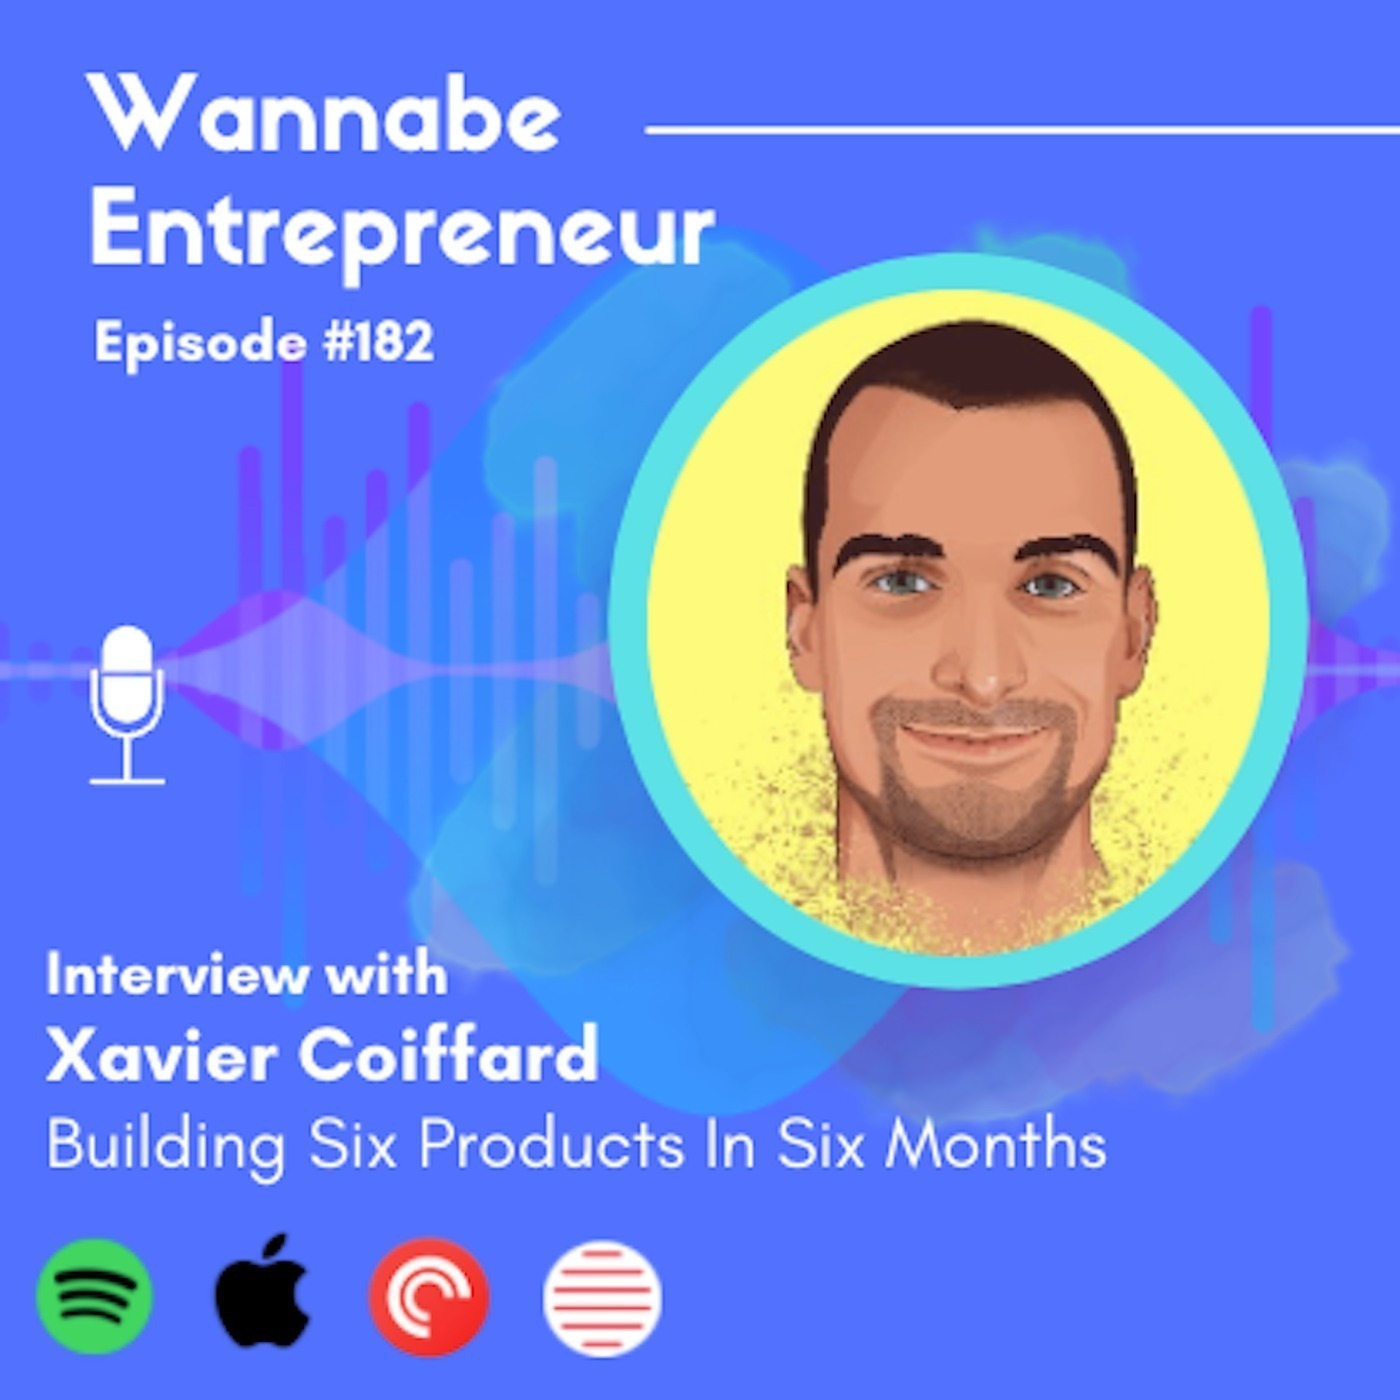 Interviewing Xavier Coiffard about Building Six Products in Six Months